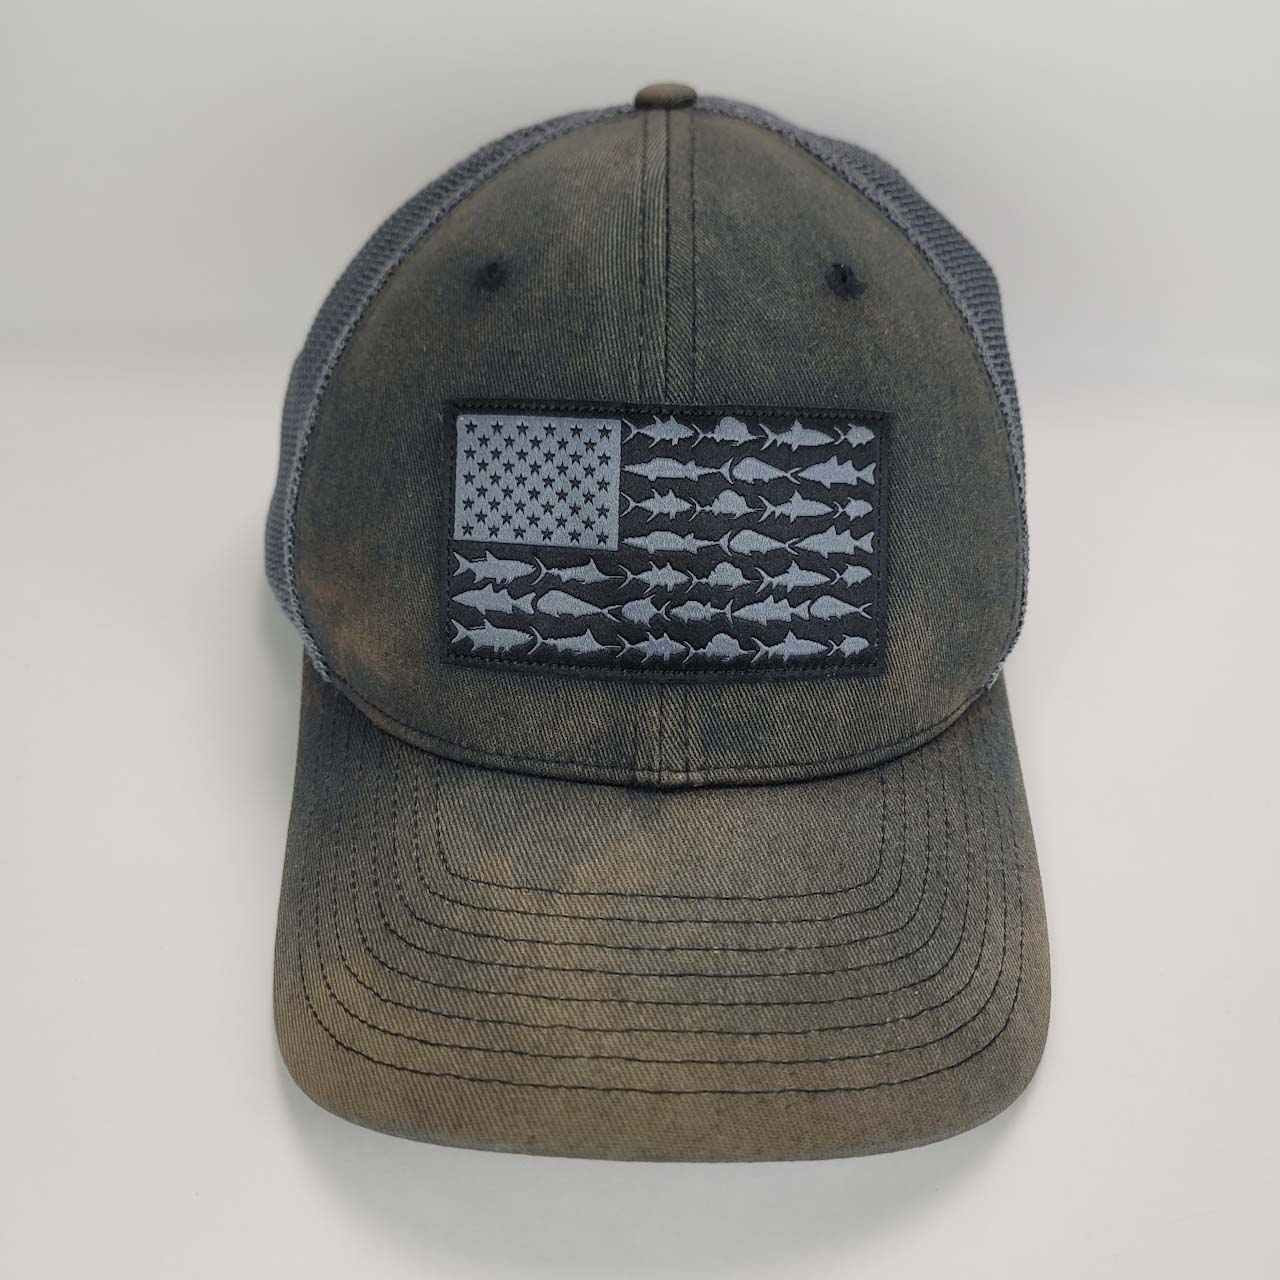 Performance Fishing Gear Cap - Fitted Gray Mesh - Breathable - Nice! -  Treasure Website